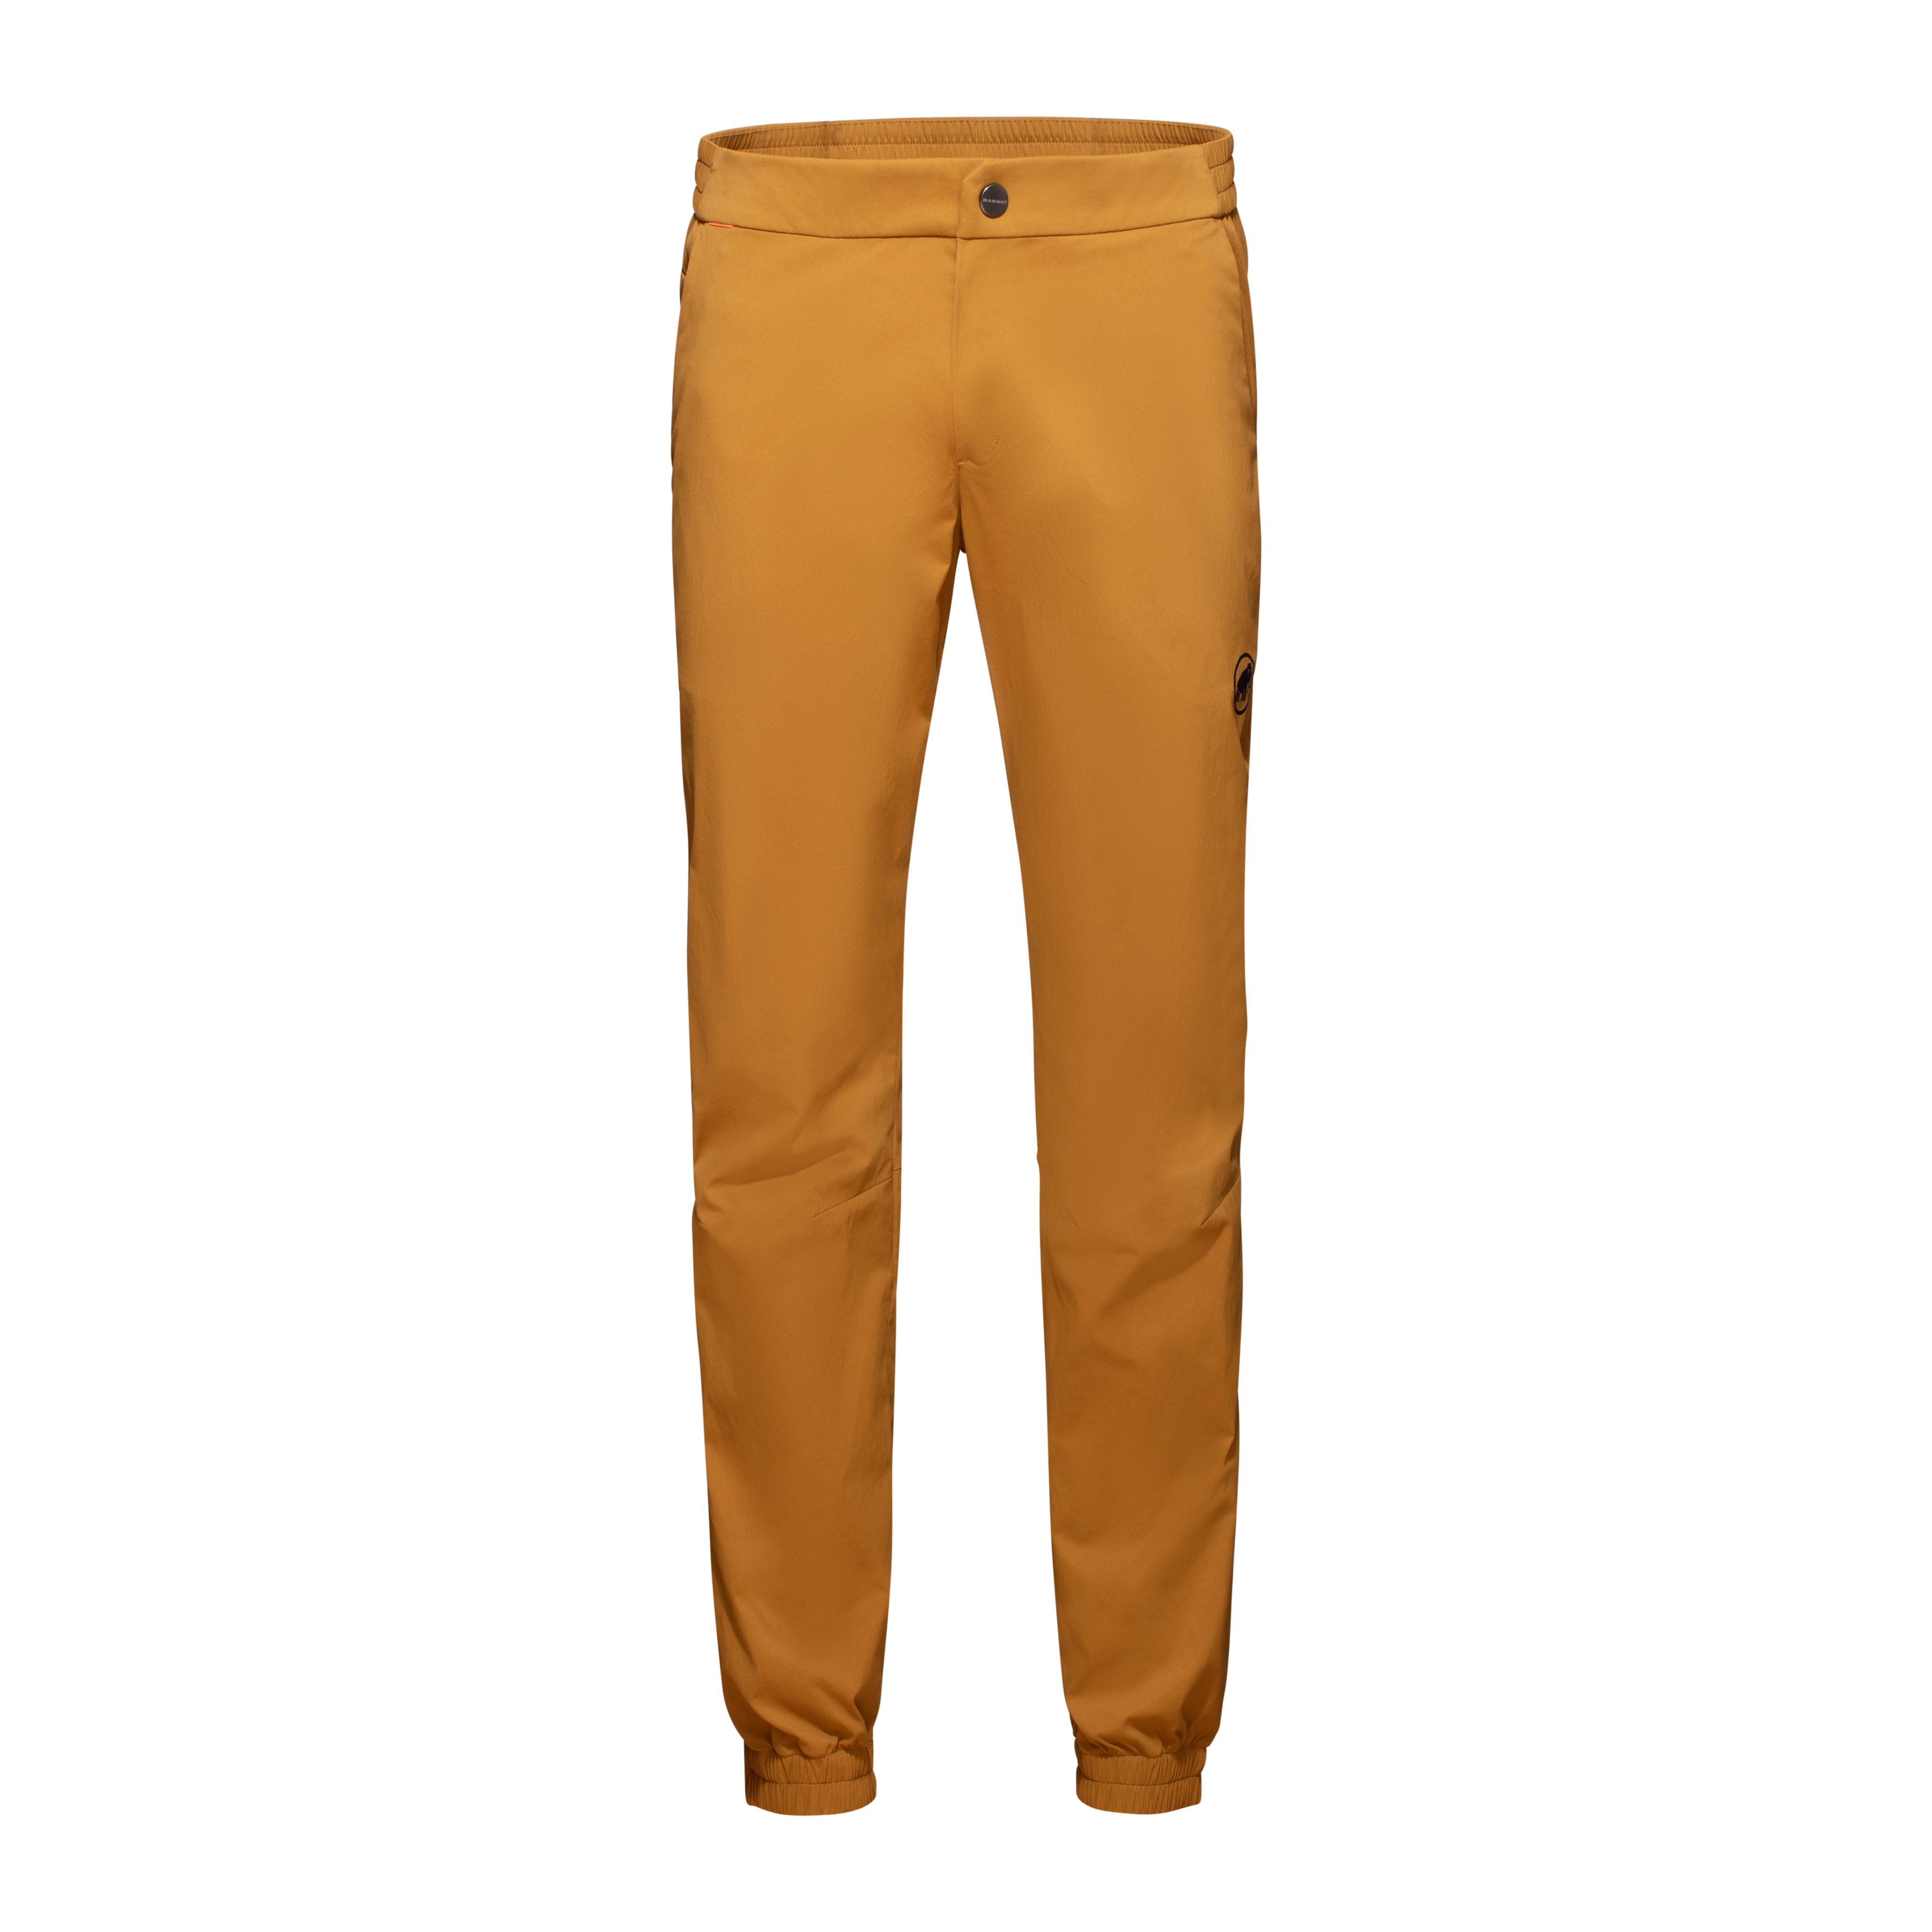 Pants & Shorts : Uncompromising Performance Mammut Canada, Mammut shoes  Canada can be relied upon.